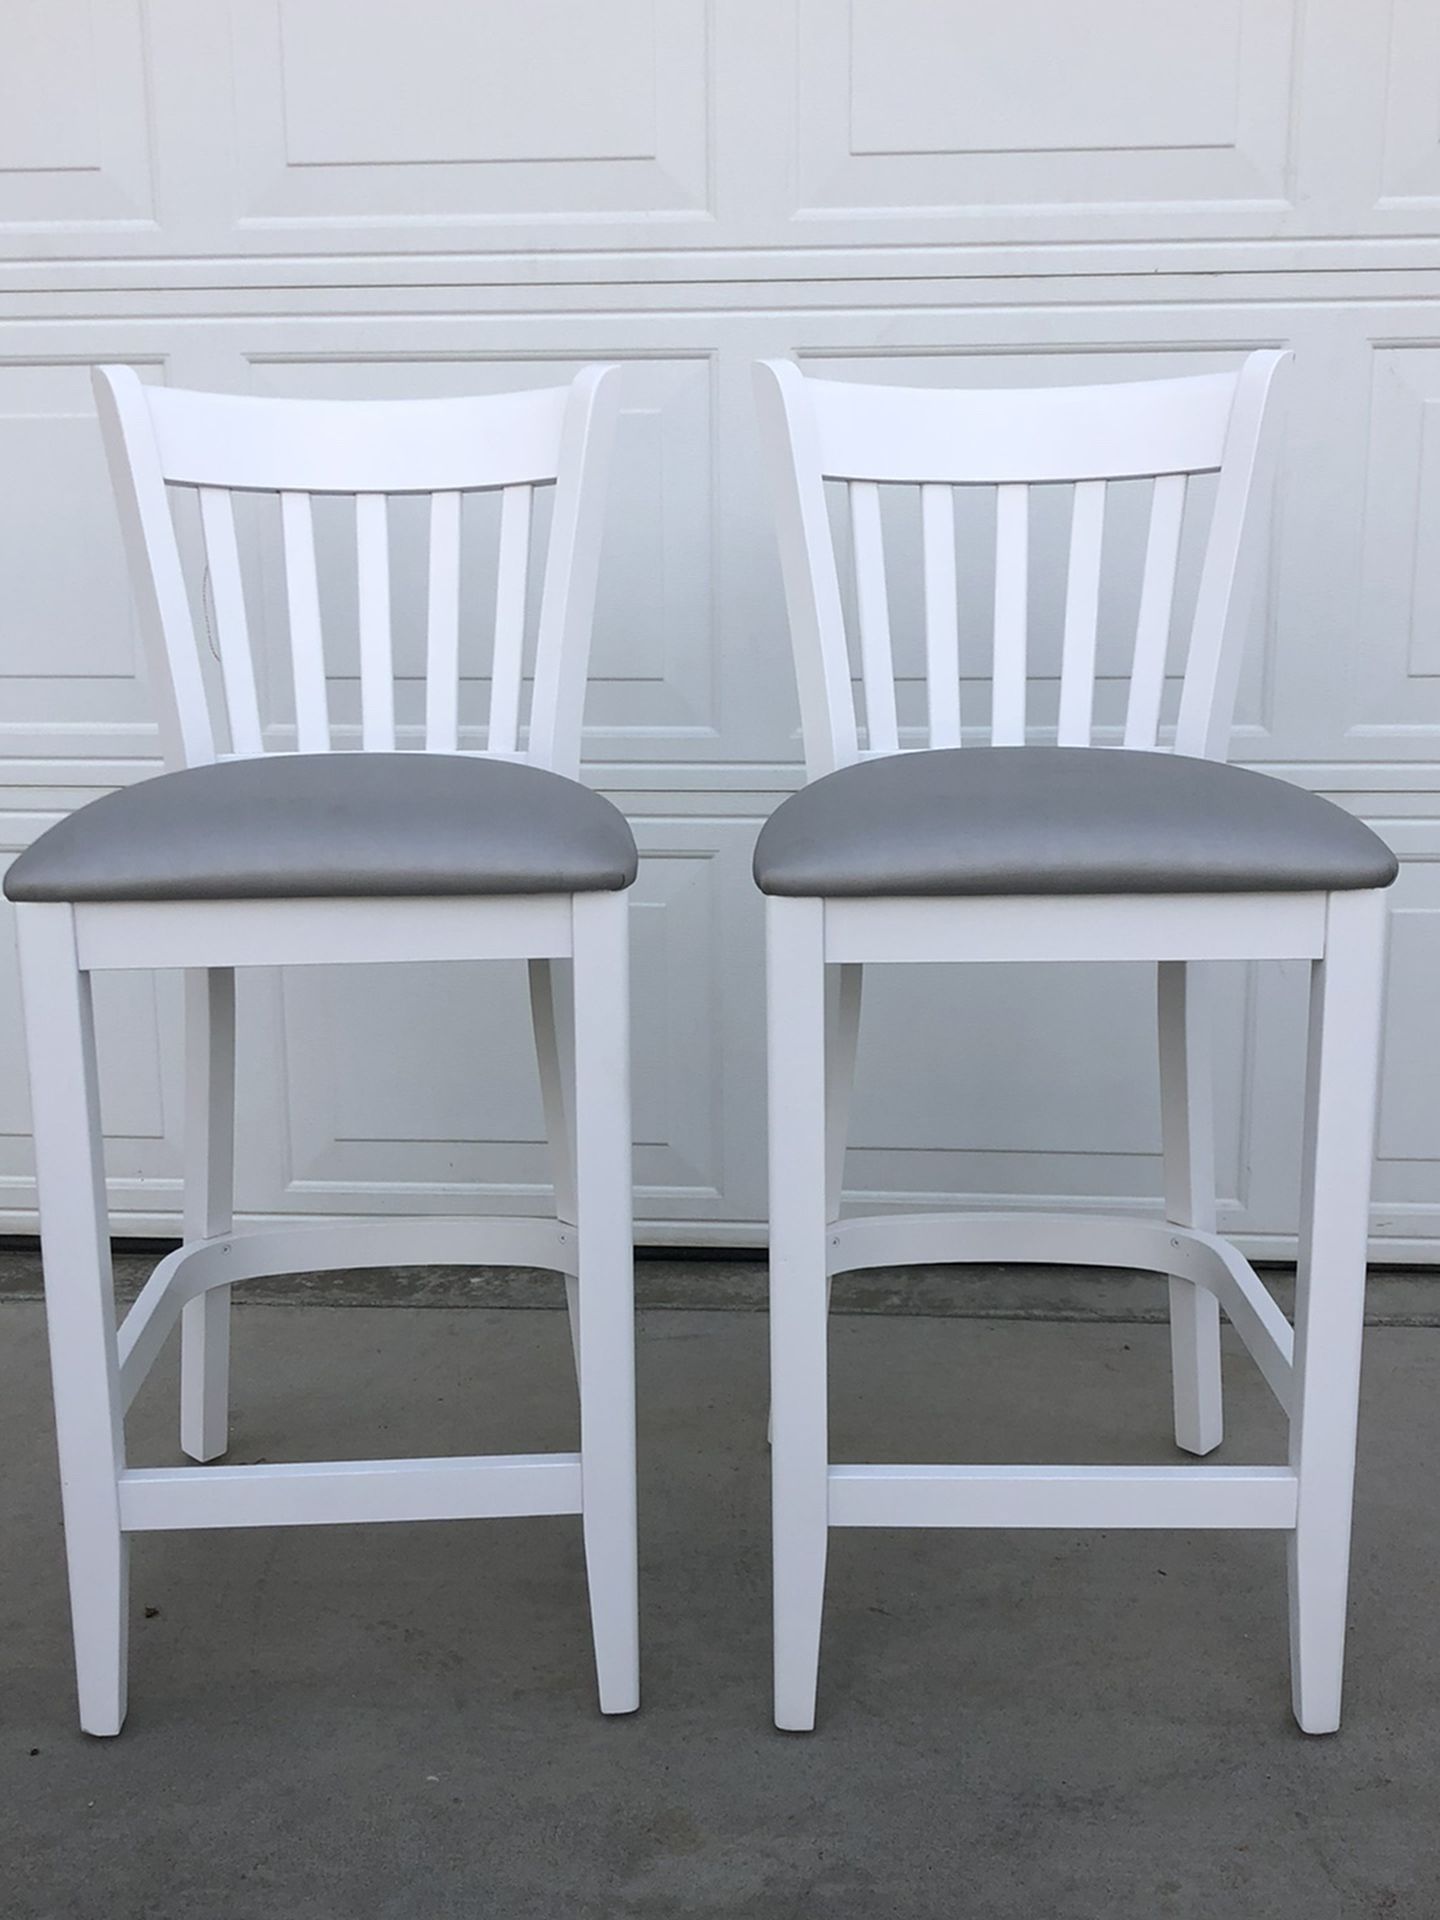 Brand New Set Of Barstools, 25inches From Floor To Seat